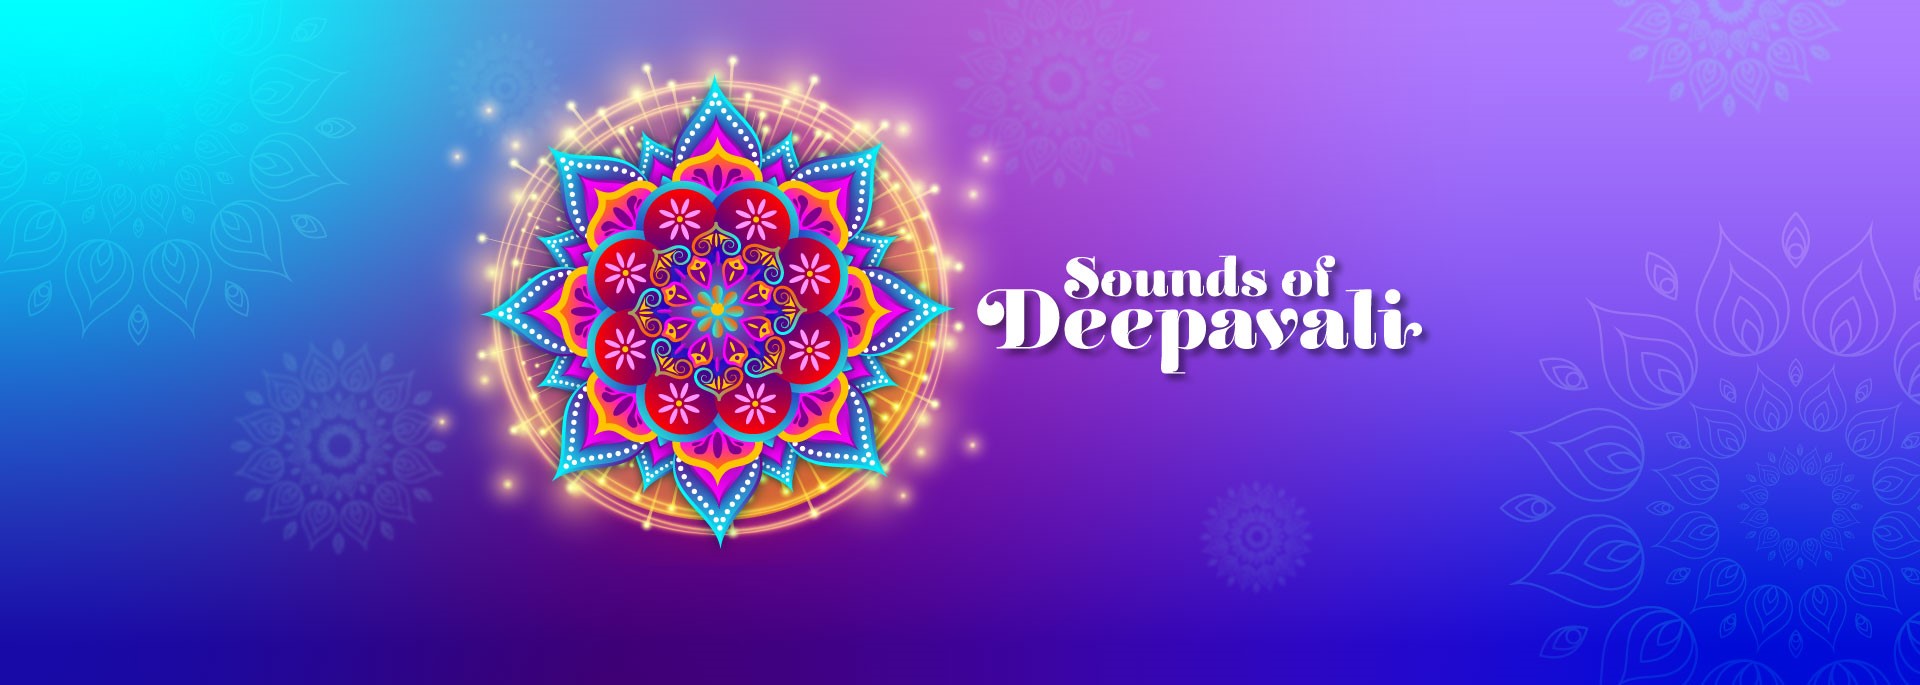 Create unique kolam with your sounds of Deepavali & spread the joy to loved ones